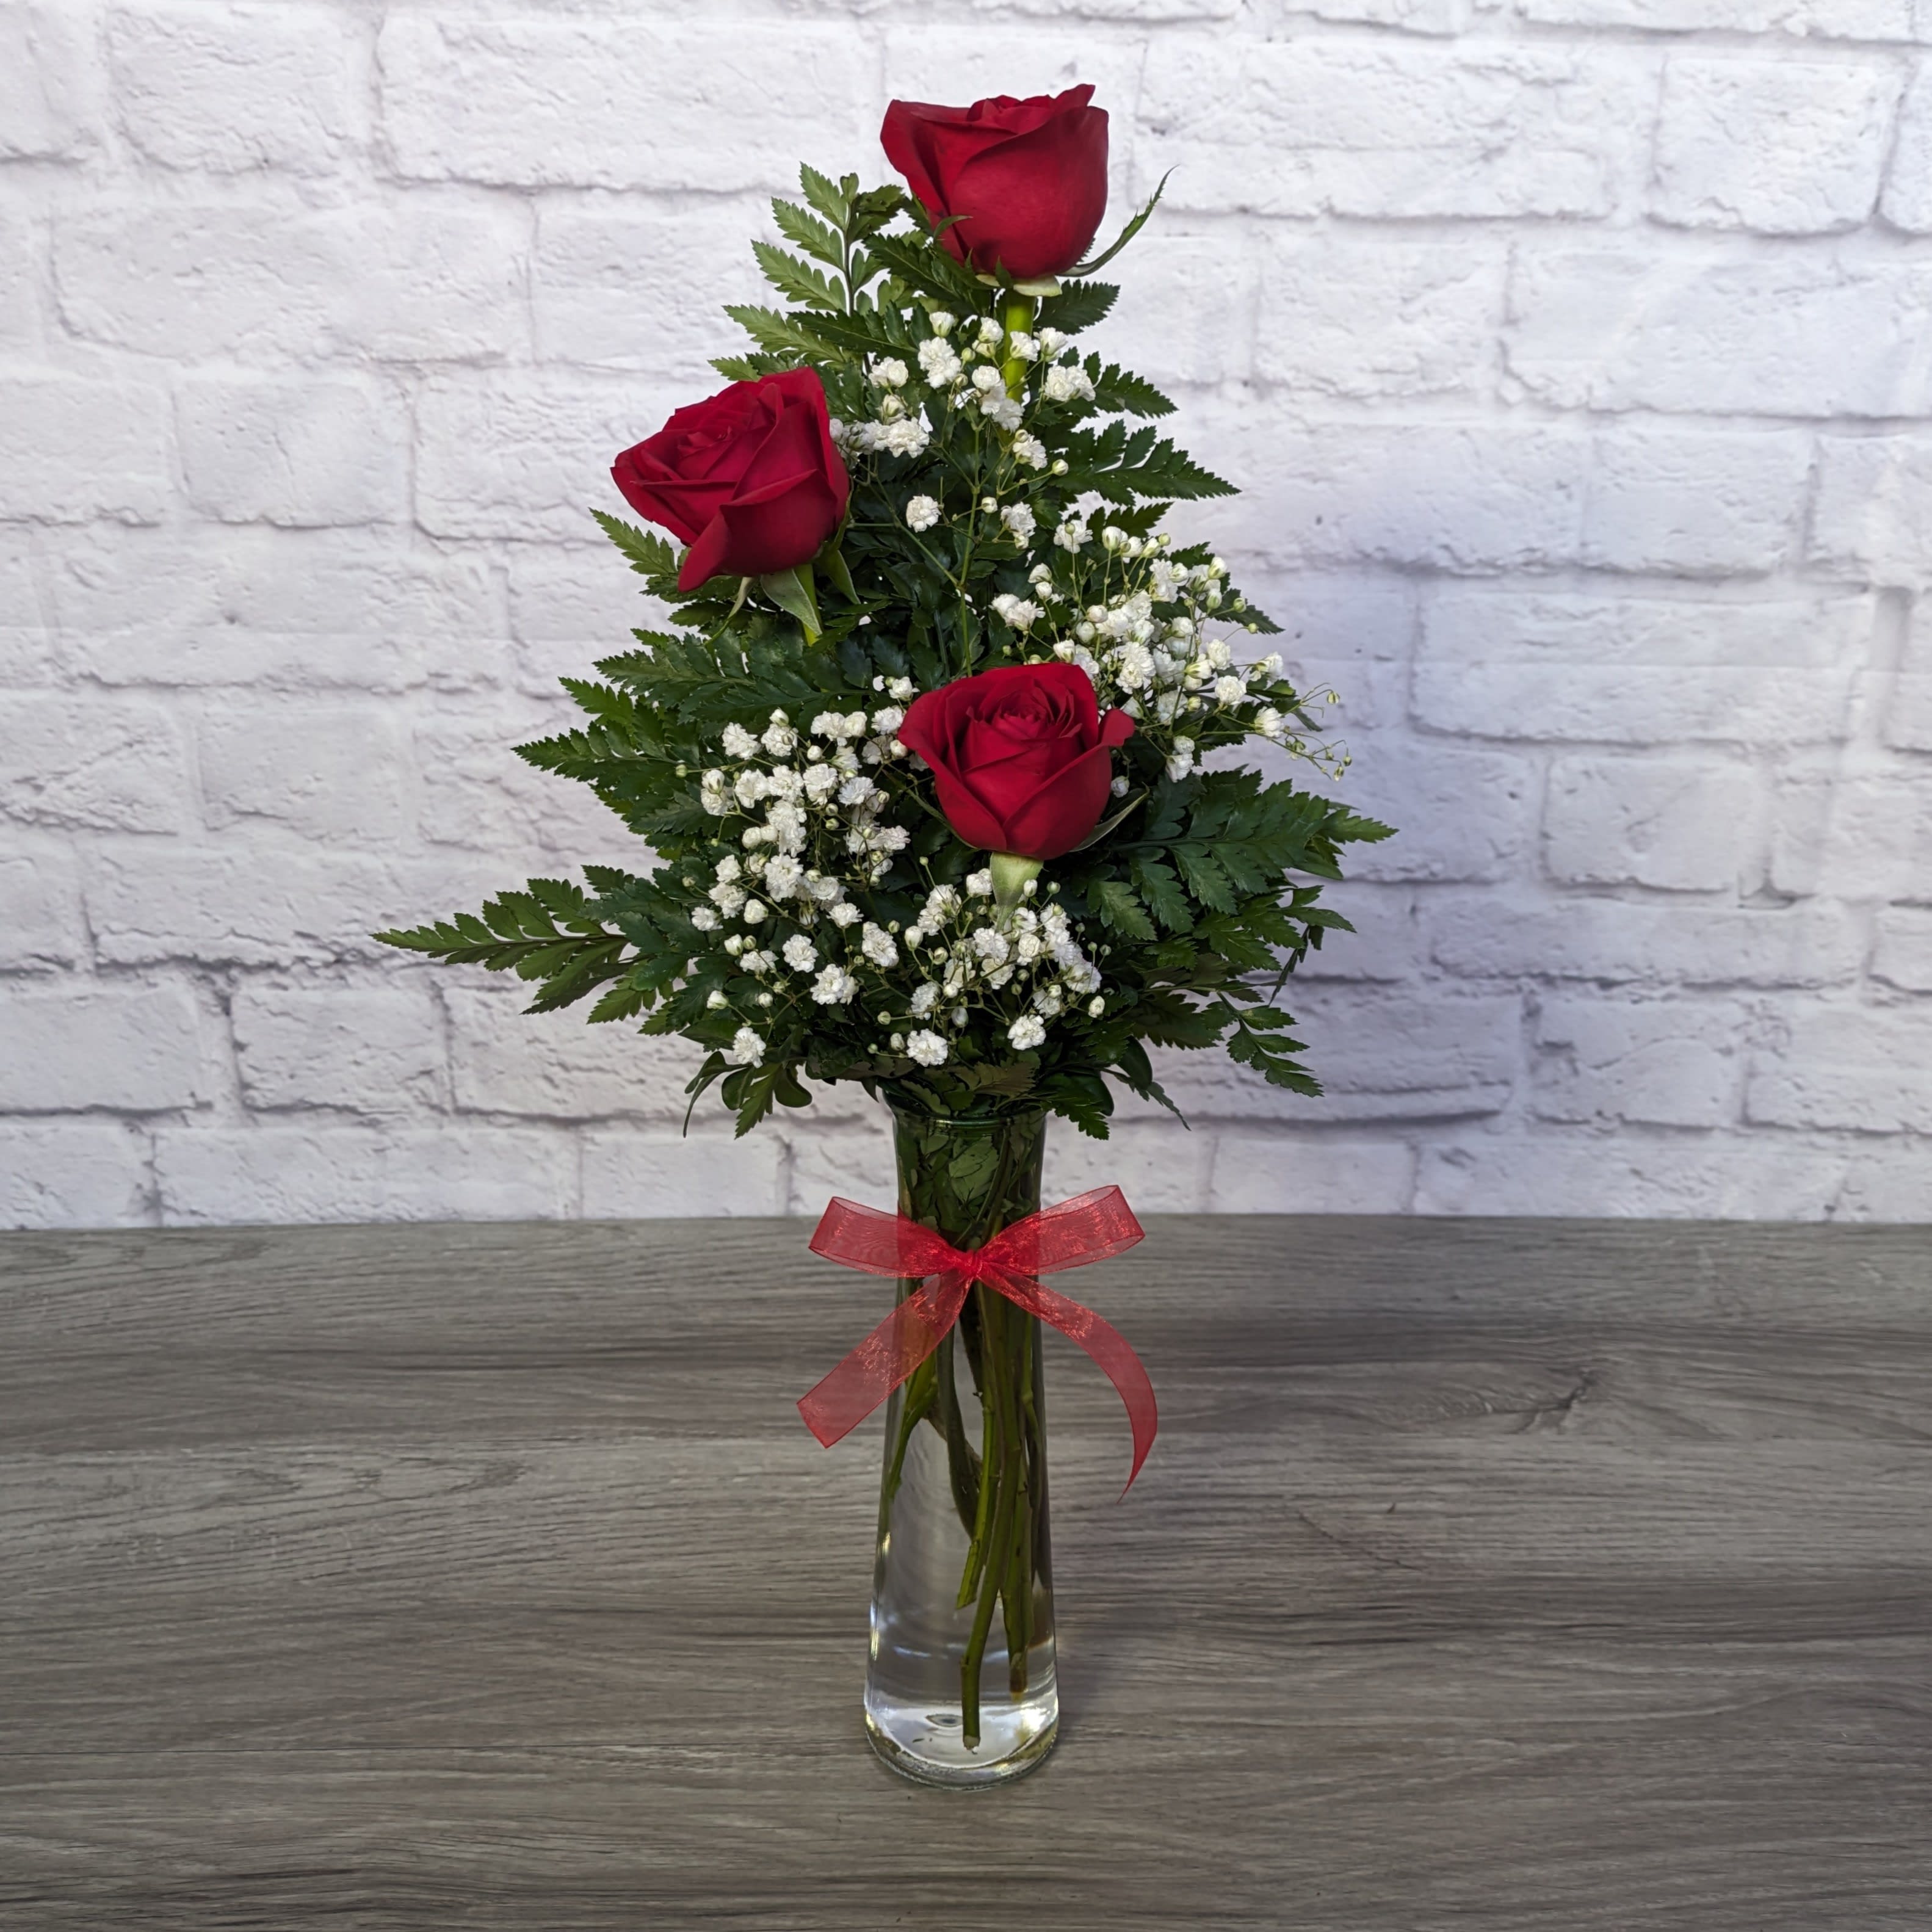 Three Rose Bud Vase - Send a cute and sweet red rose bud vase to your loved one or friend.  Orientation: One Sided 15&quot;H X 5&quot;W 